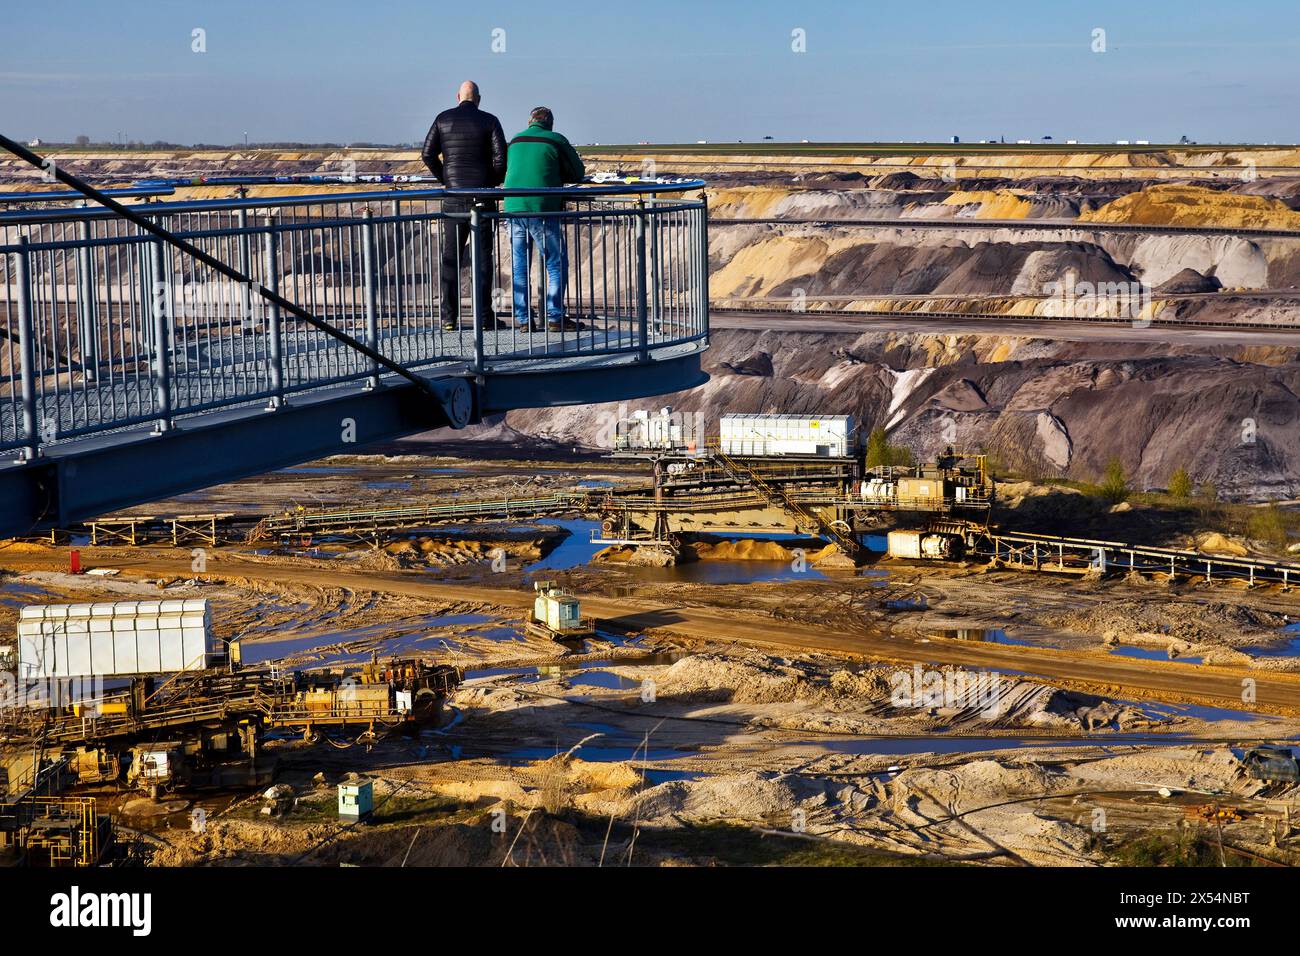 two men on the Jackerath viewing platform look out over the Garzweiler open-cast lignite mine, Germany, North Rhine-Westphalia, Rhineland, Juechen Stock Photo